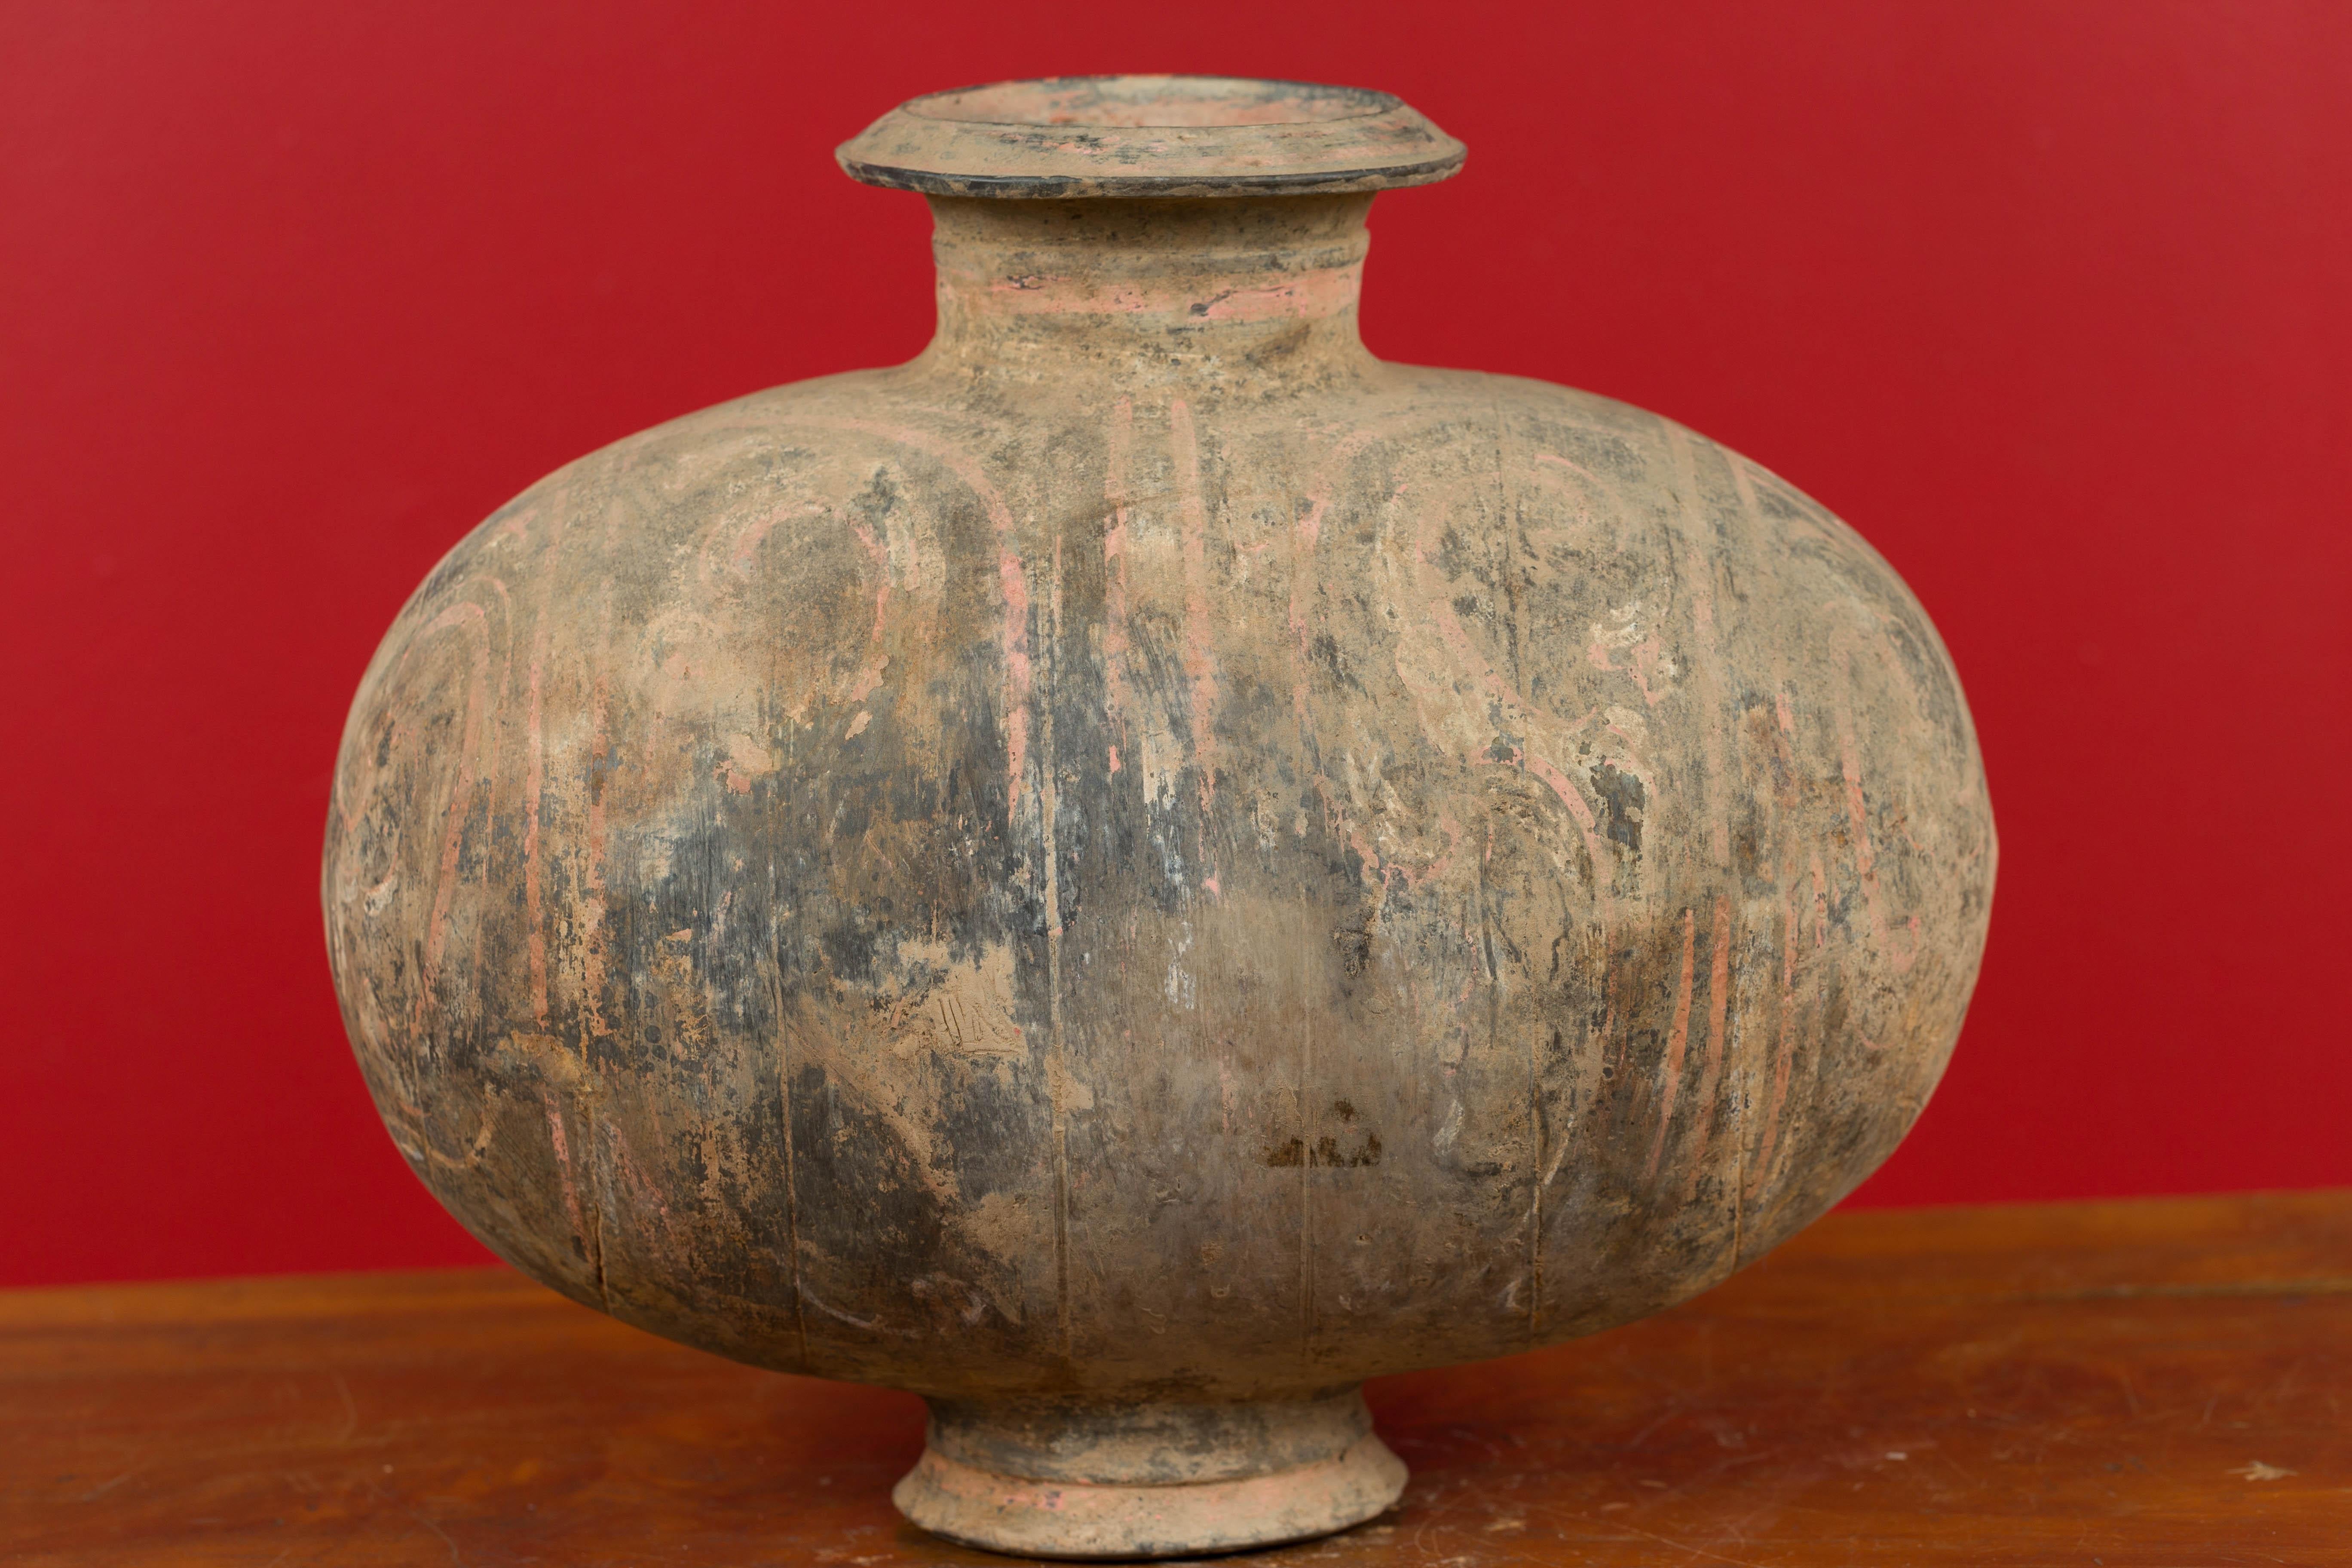 18th Century and Earlier Han Dynasty Earthenware Cocoon Jar with Painted Decor, circa 206 BC-220 AD